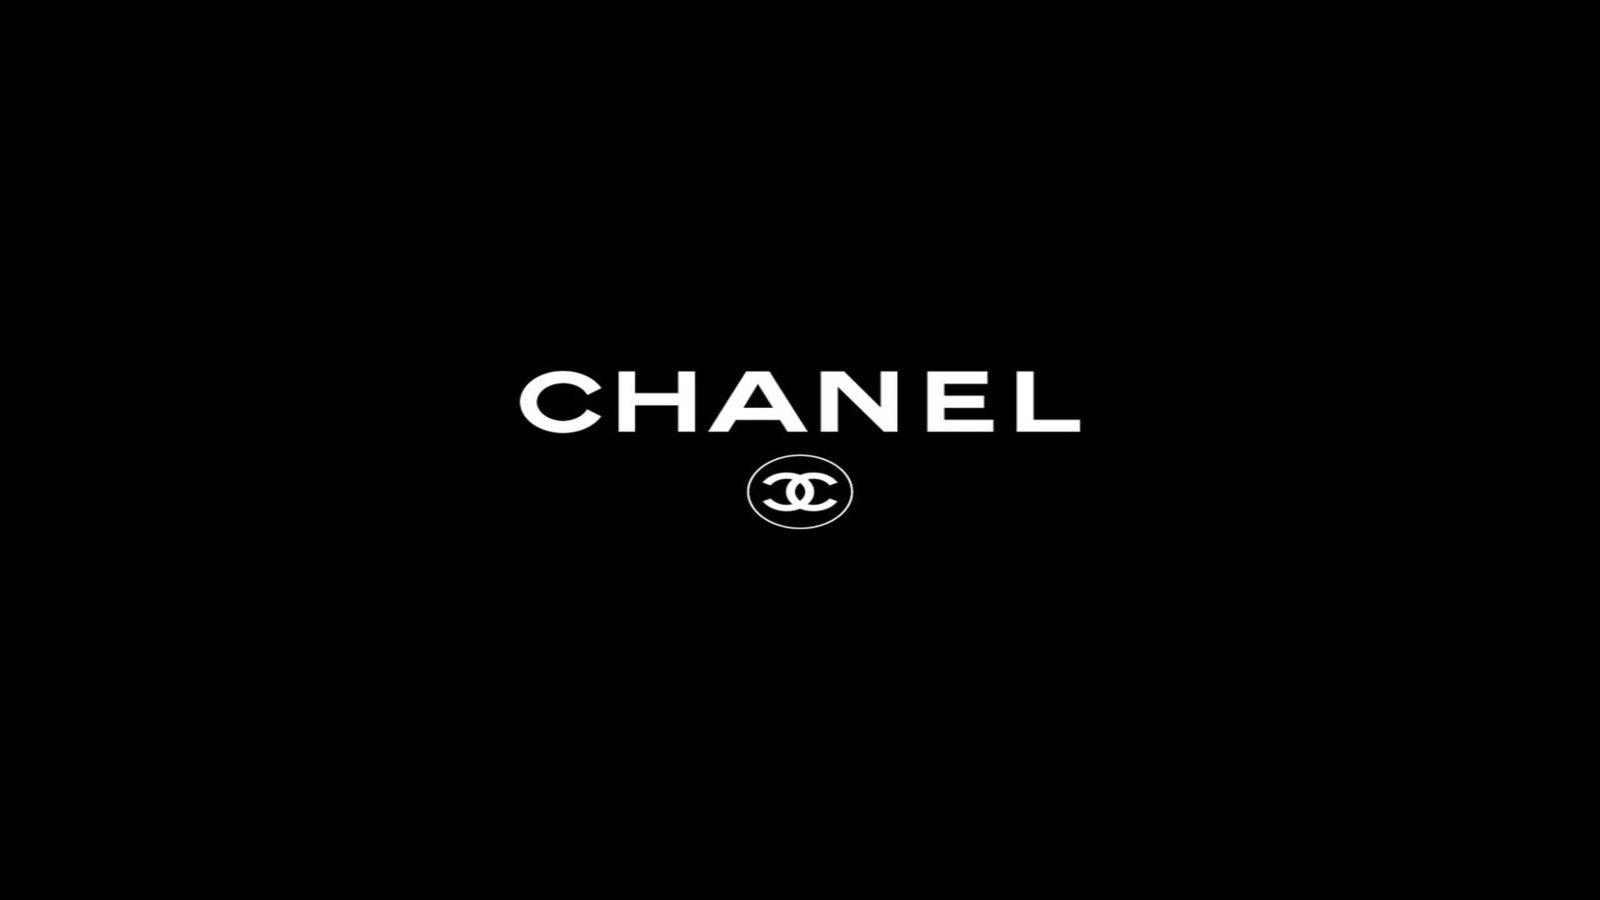 5 Chanel Hd Wallpapers Backgrounds Wallpaper Abyss